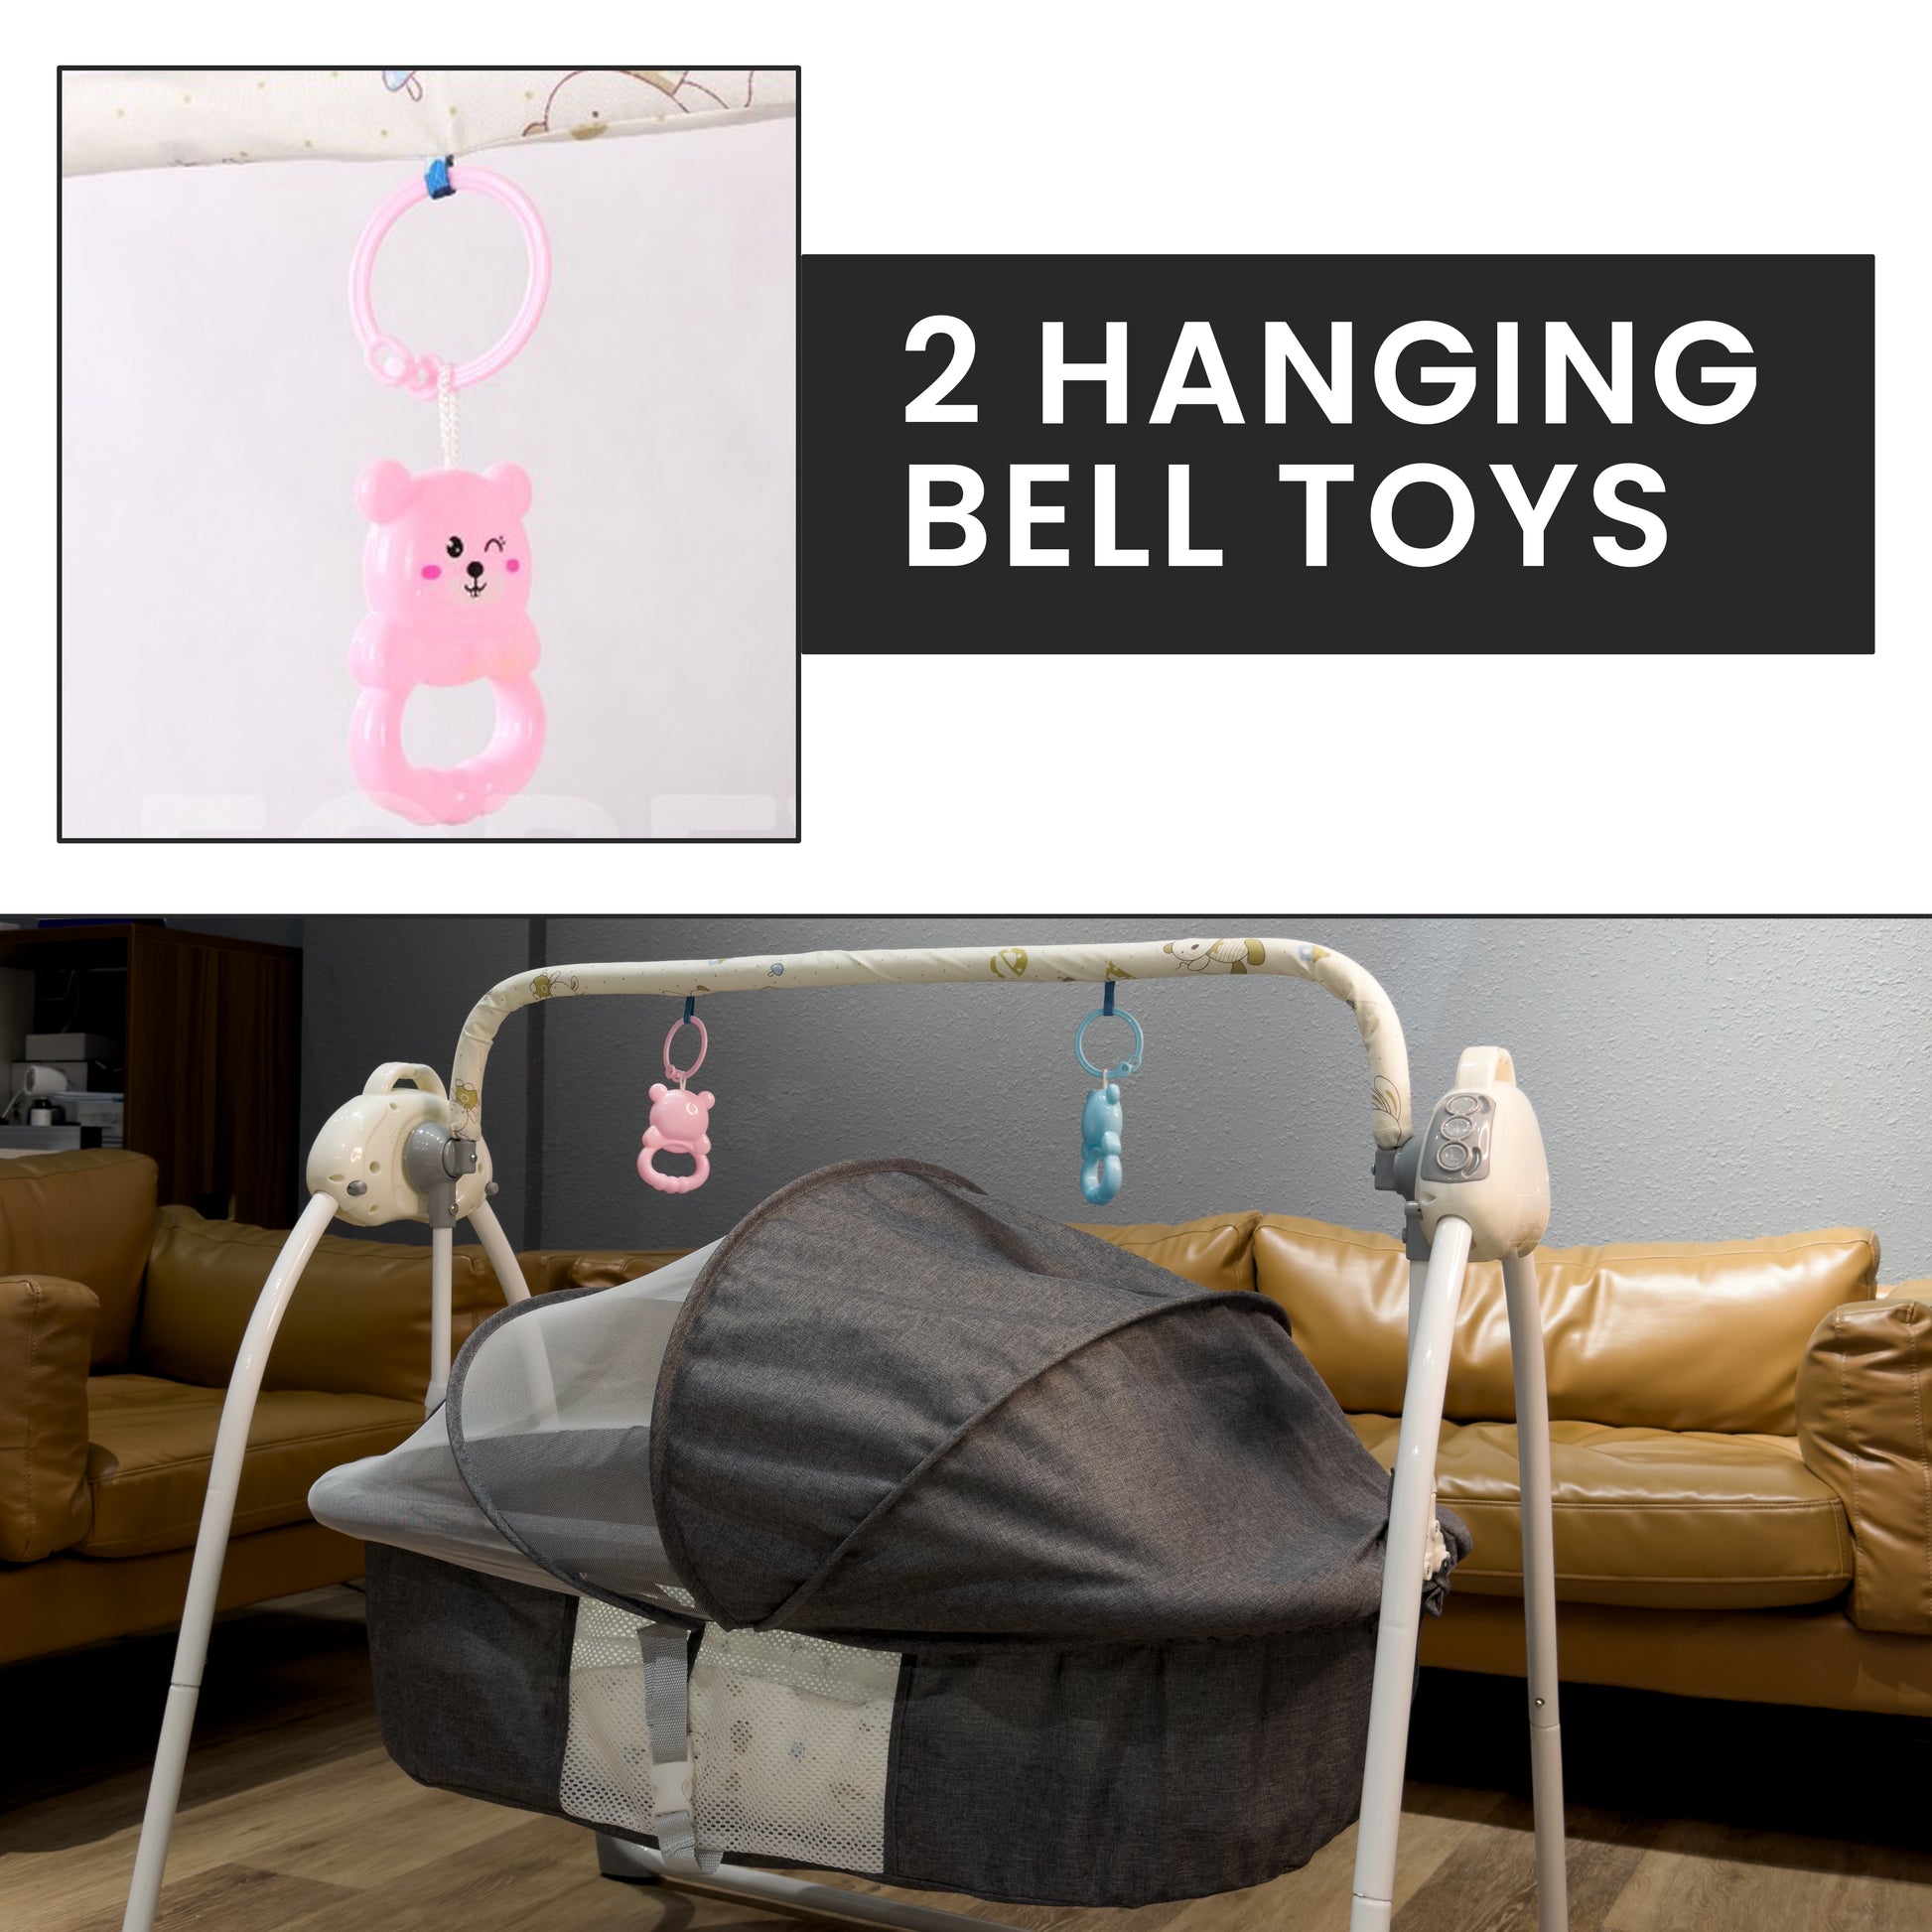 Electric Baby Cradles - Buy Electric Baby Cradles - hocc dubai - - baby playground outdoor- Shop baby product - Shop Pet product - shop home decor and lighting